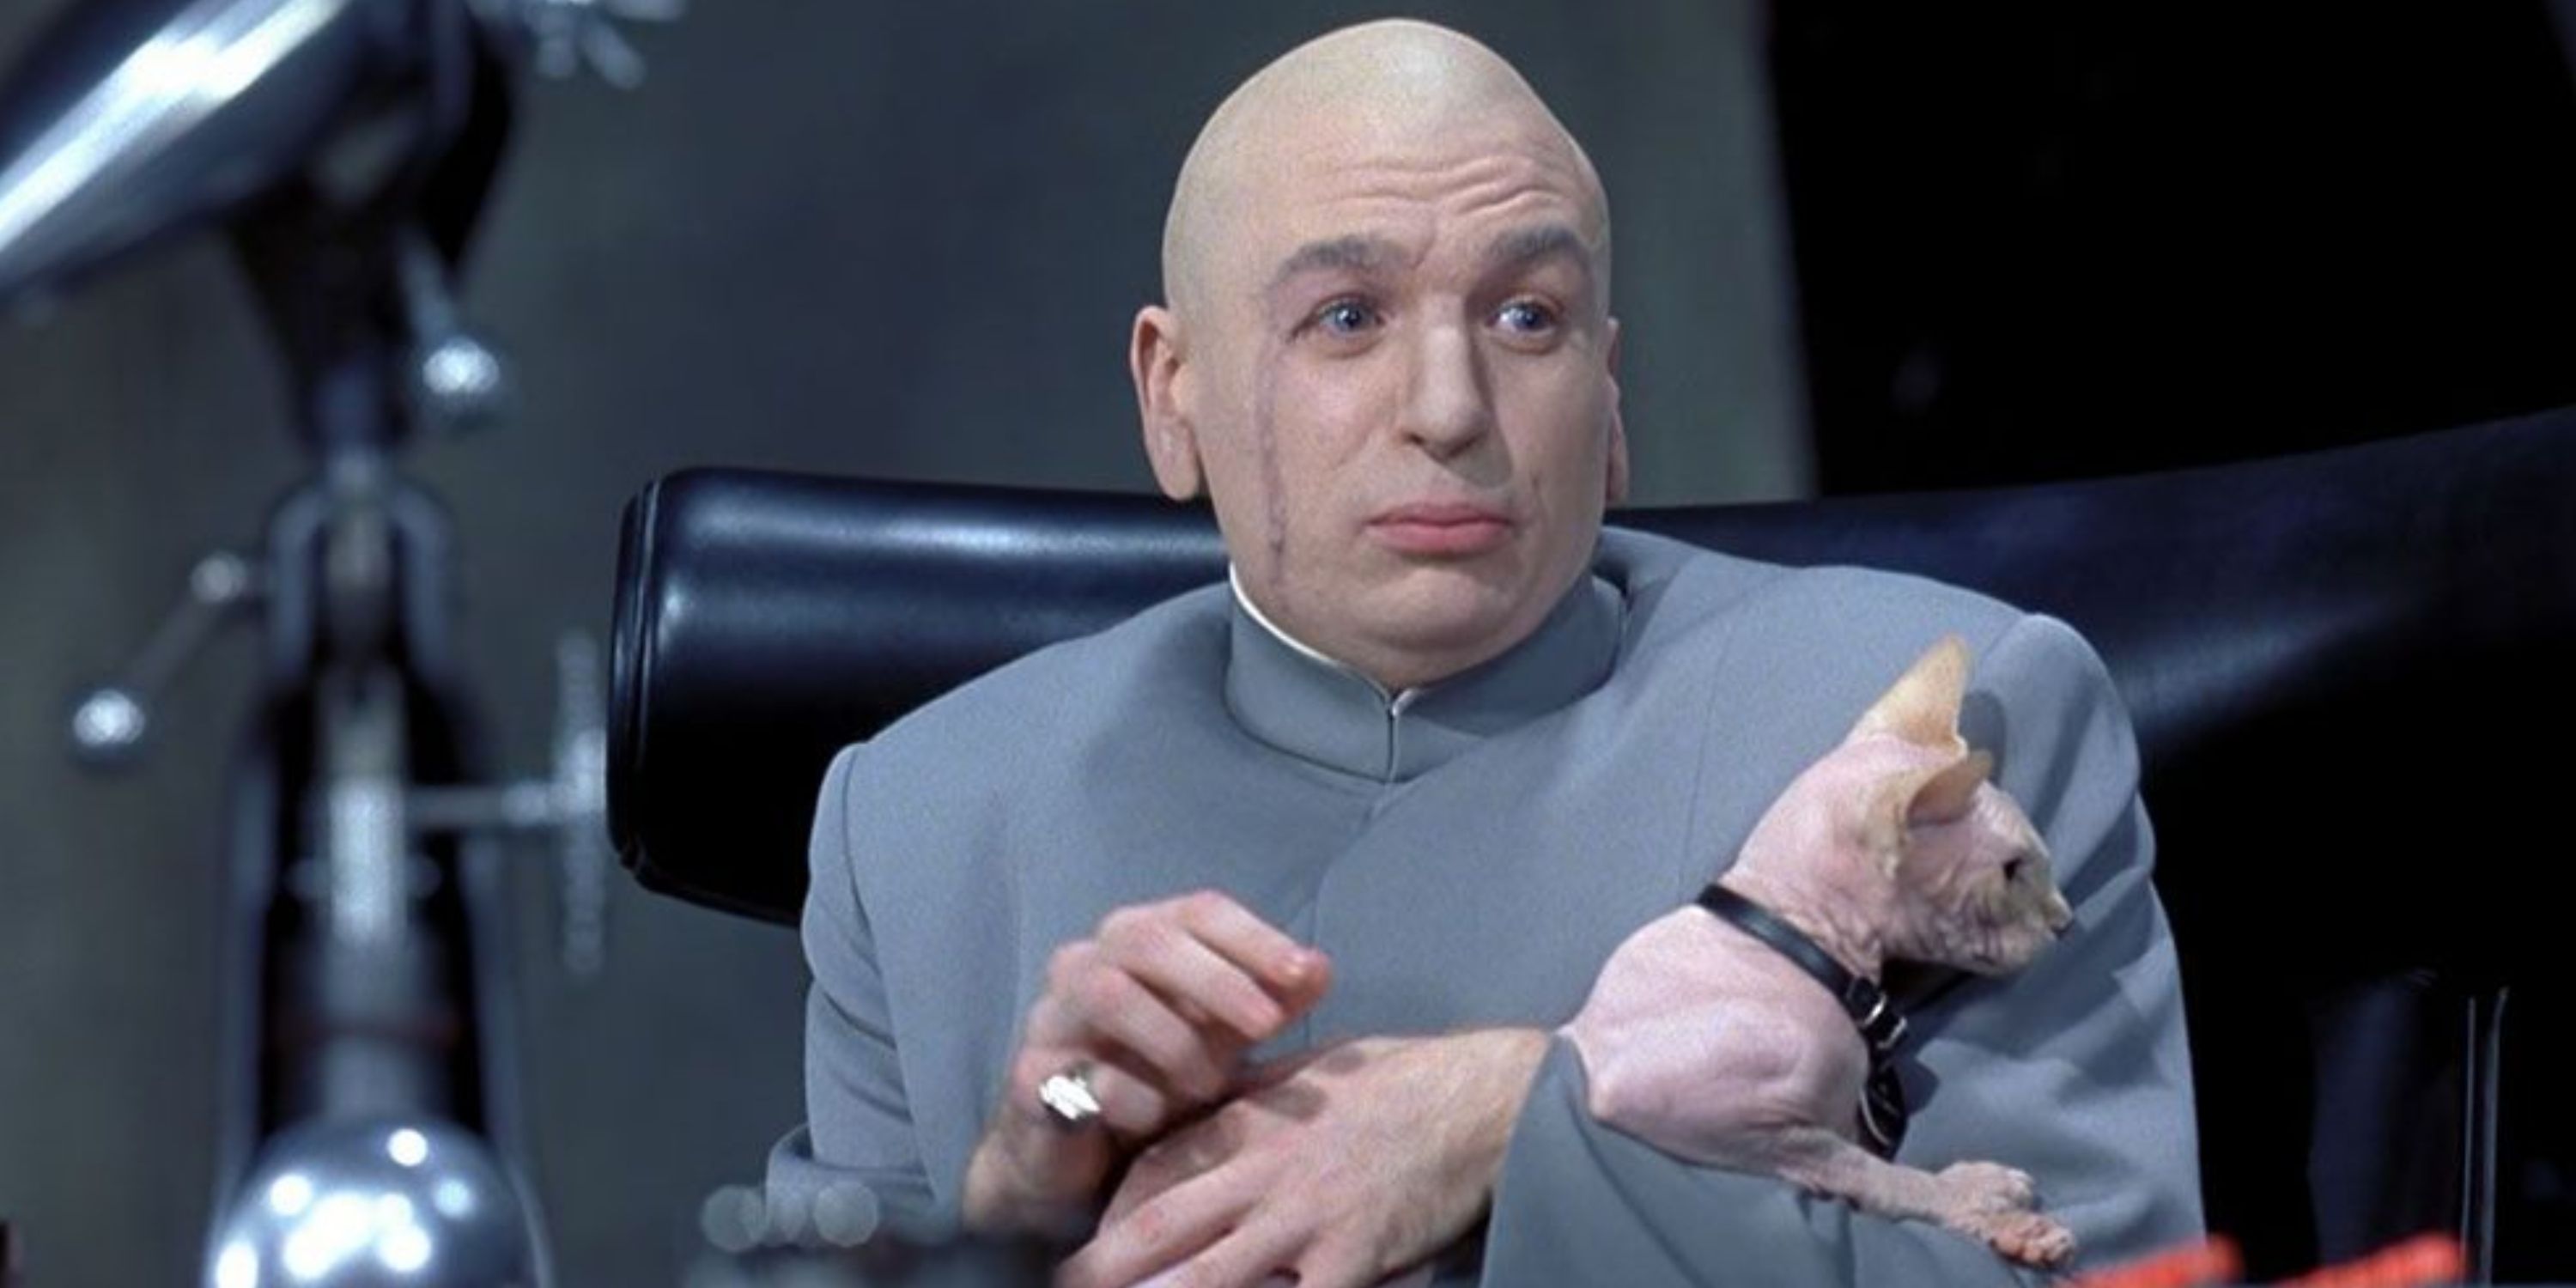 dr-evil-striking-his-hairless-cat-in-a-scene-from-austin-powers.jpg